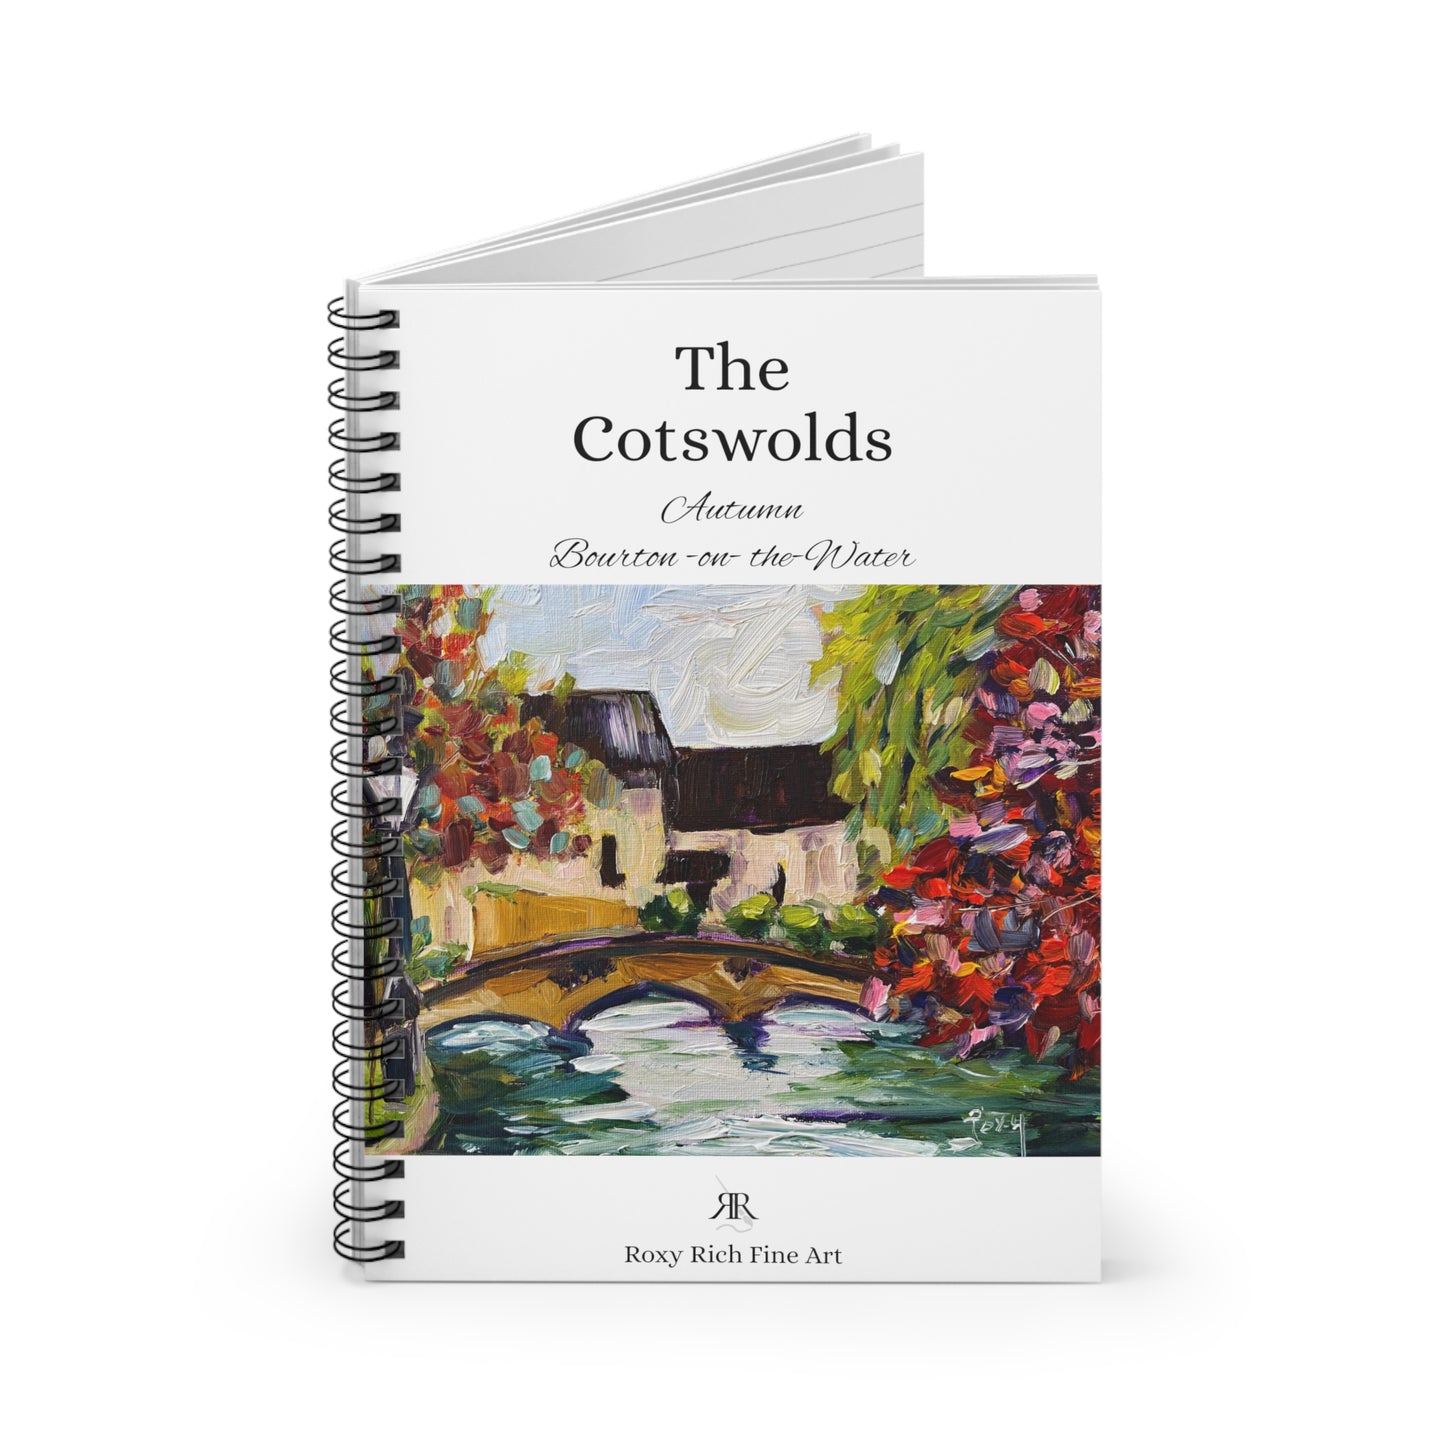 Autumn in Bourton on the Water "The Cotswolds" Spiral Notebook